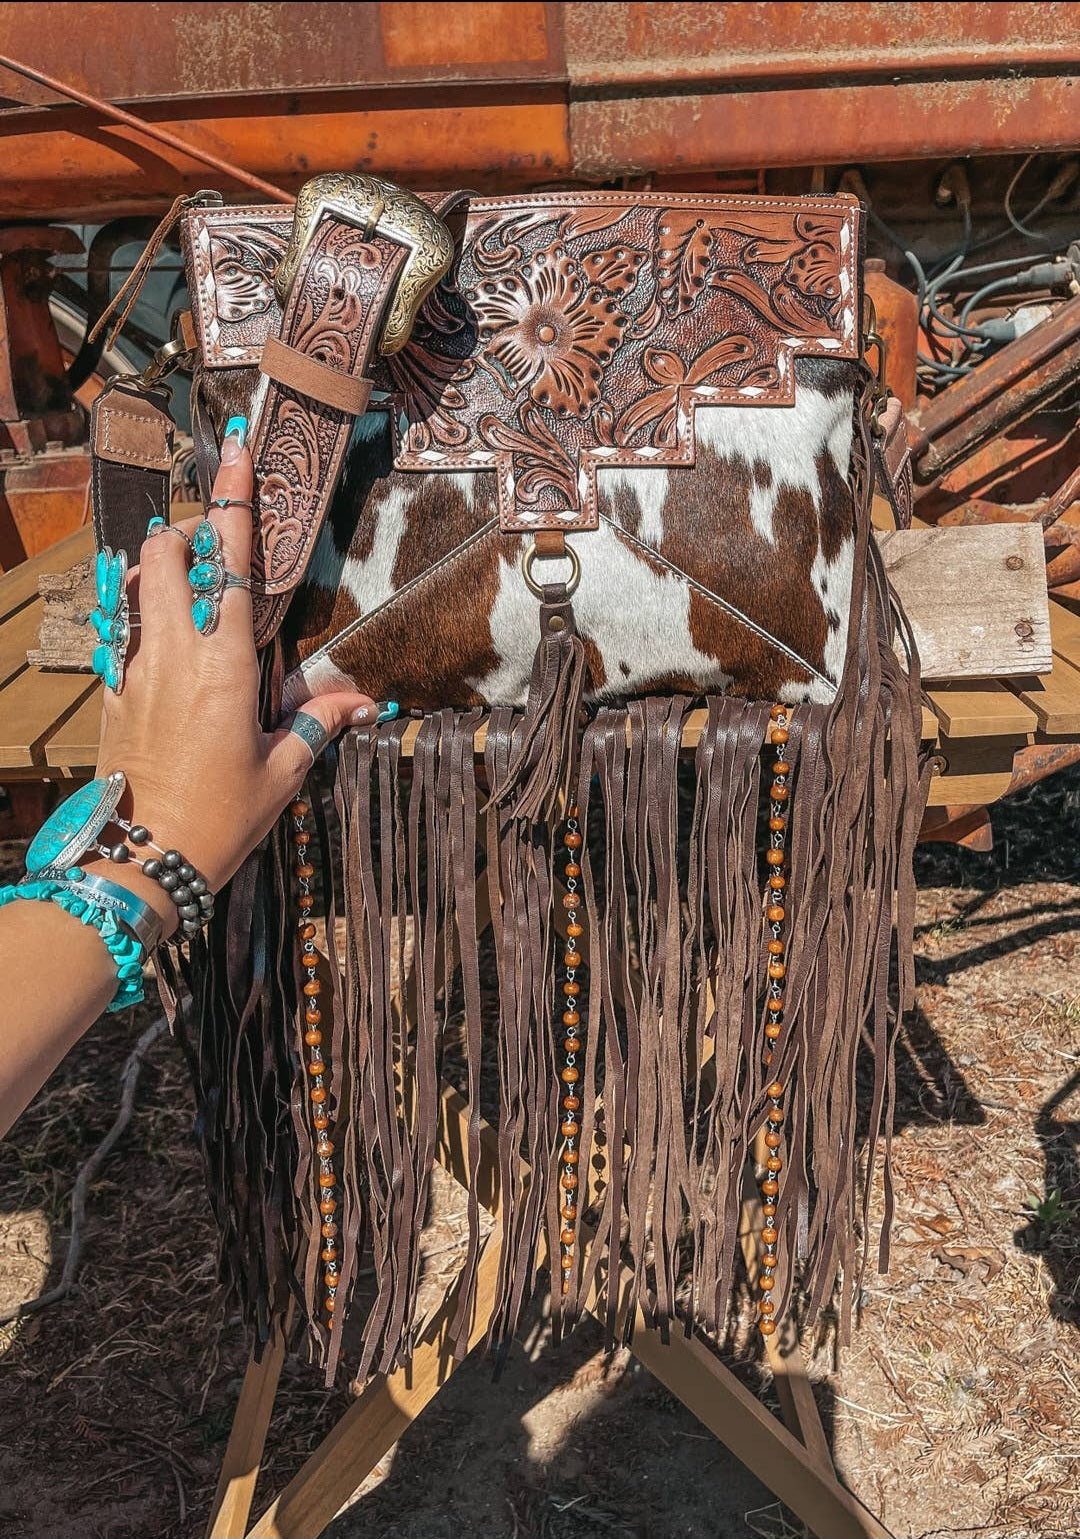 The Lancaster Cowhide Leather Tooled Purse